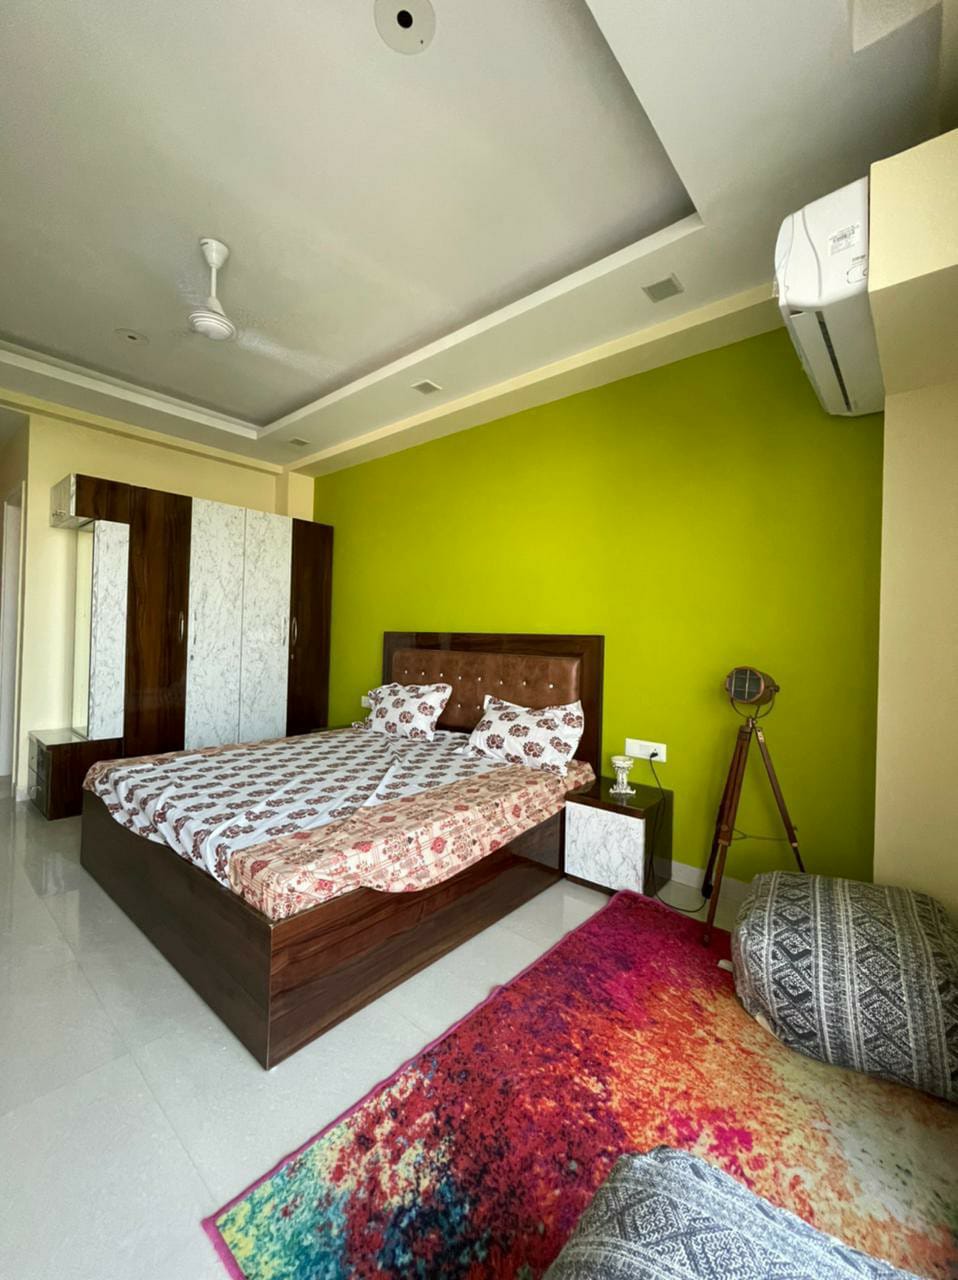 Fully Furnished Room in Gurgaon, Free classifieds in Gurgaon